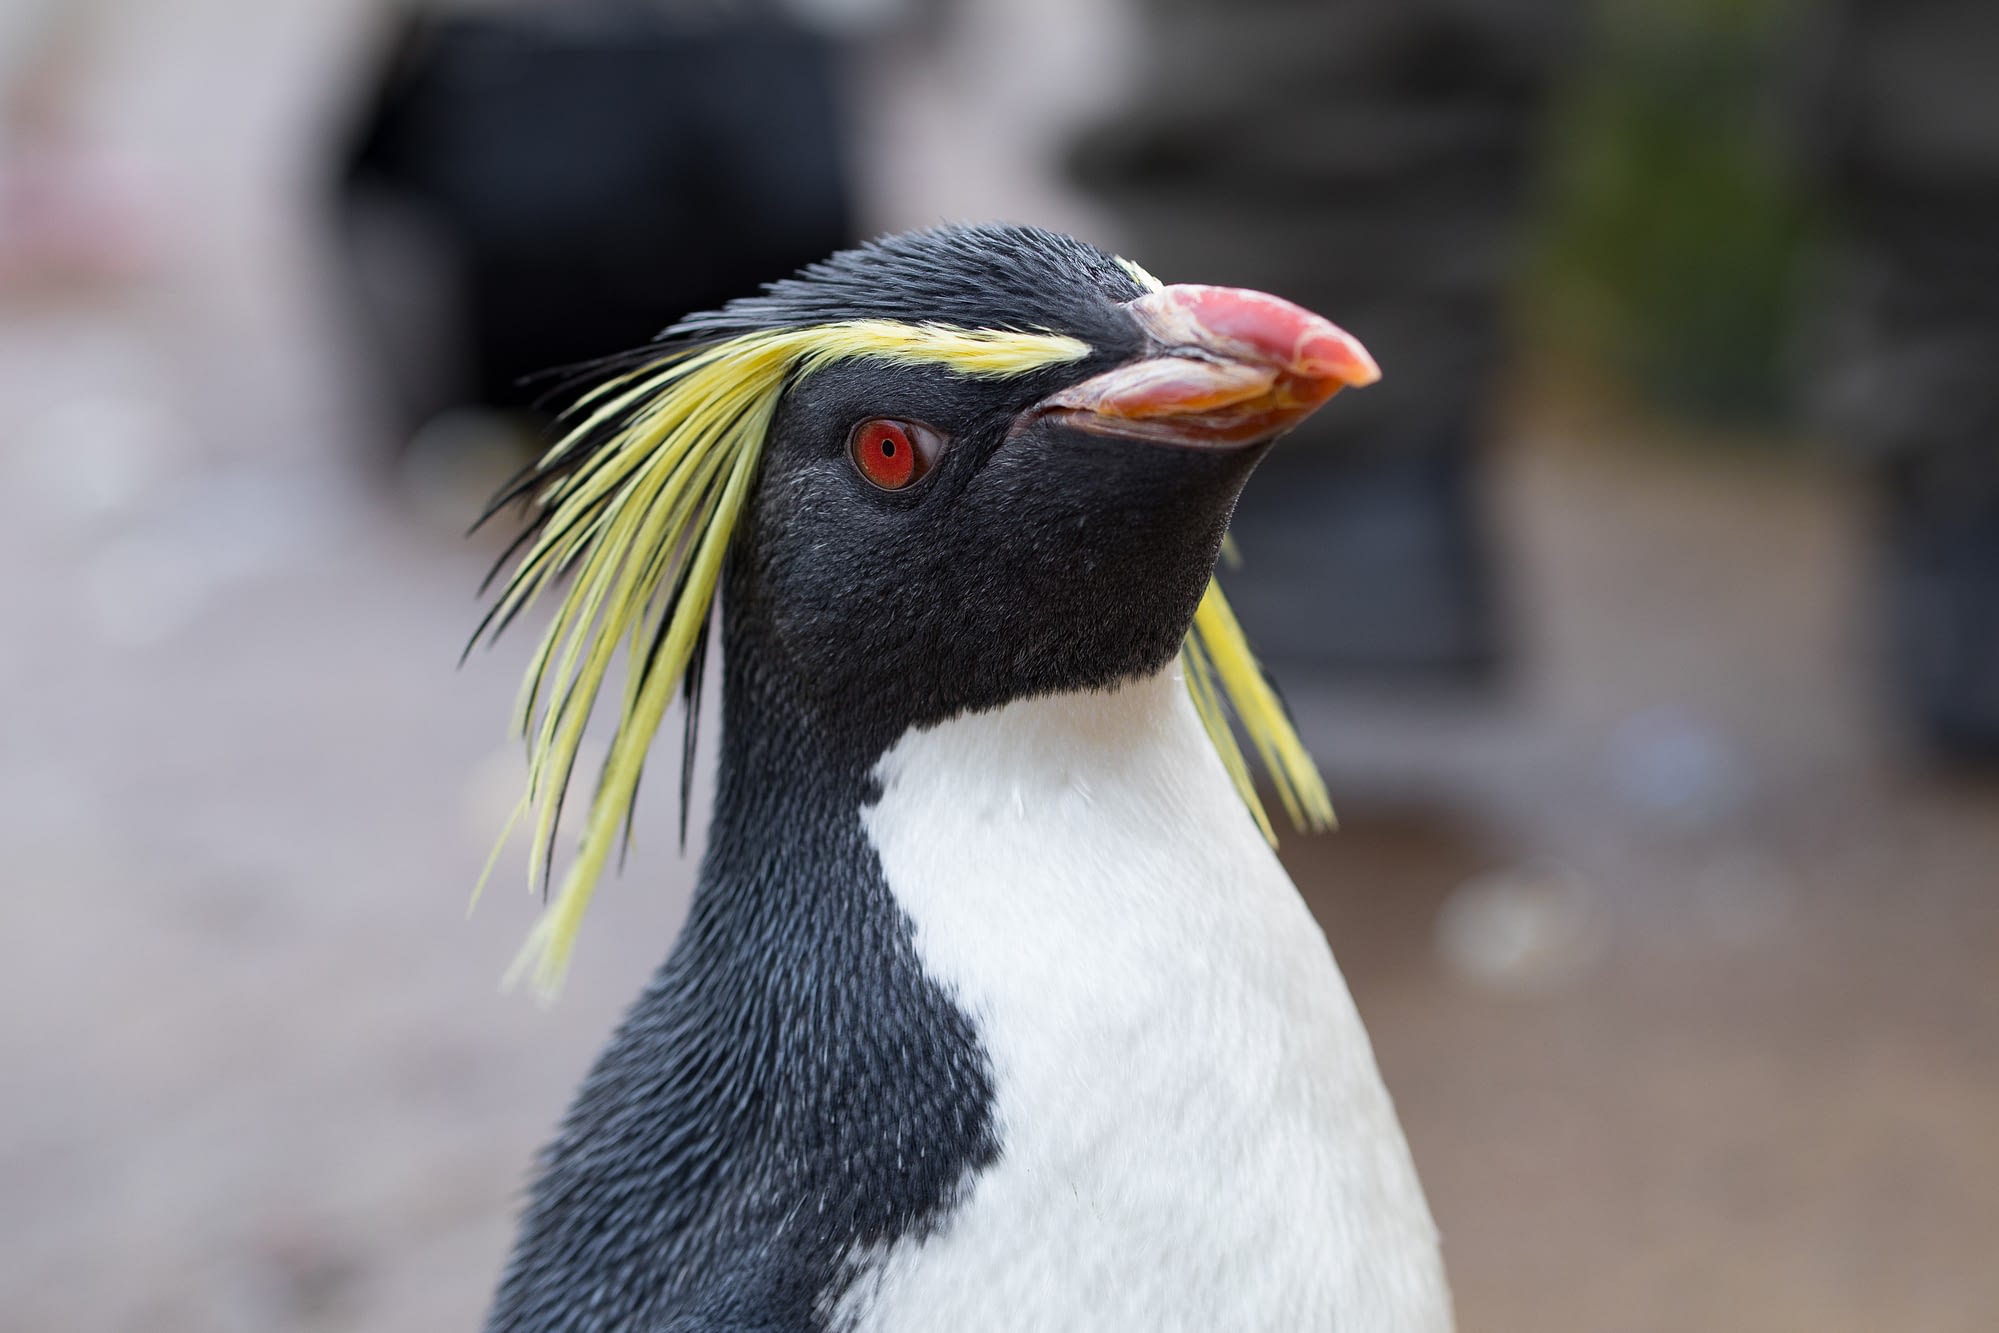 Ocean voyagers – the travels of northern rockhopper penguins across the high seas